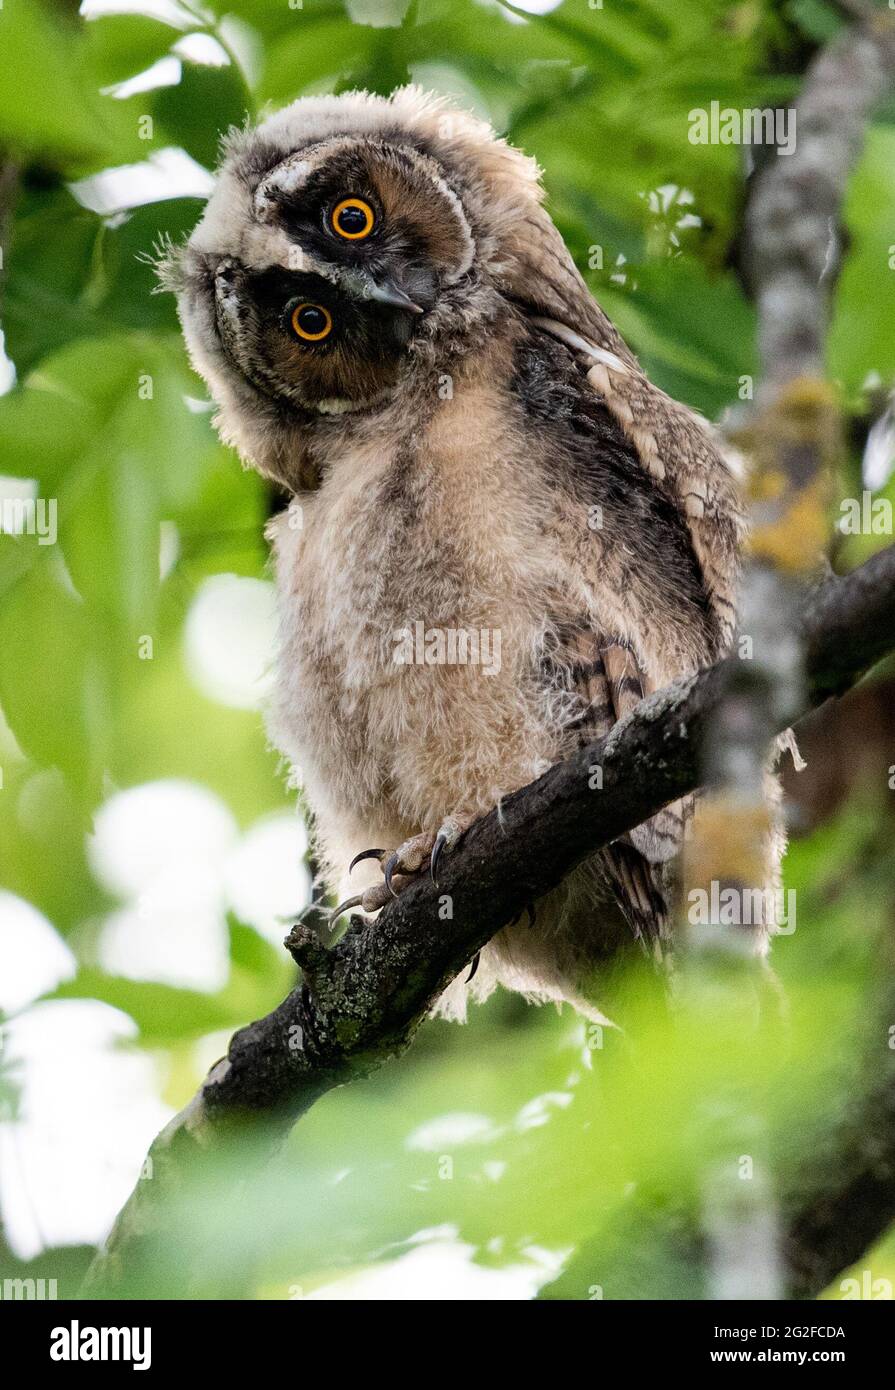 10 June 2021, Berlin: A young long-eared owl sits in a tree in the Fliegersiedlung in Tempelhof. In Berlin long-eared owls hunt and breed mainly near large open spaces, for example the Tempelhofer Feld, where they find good hunting conditions and an abundant supply of mice. Photo: Bernd von Jutrczenka/dpa Stock Photo